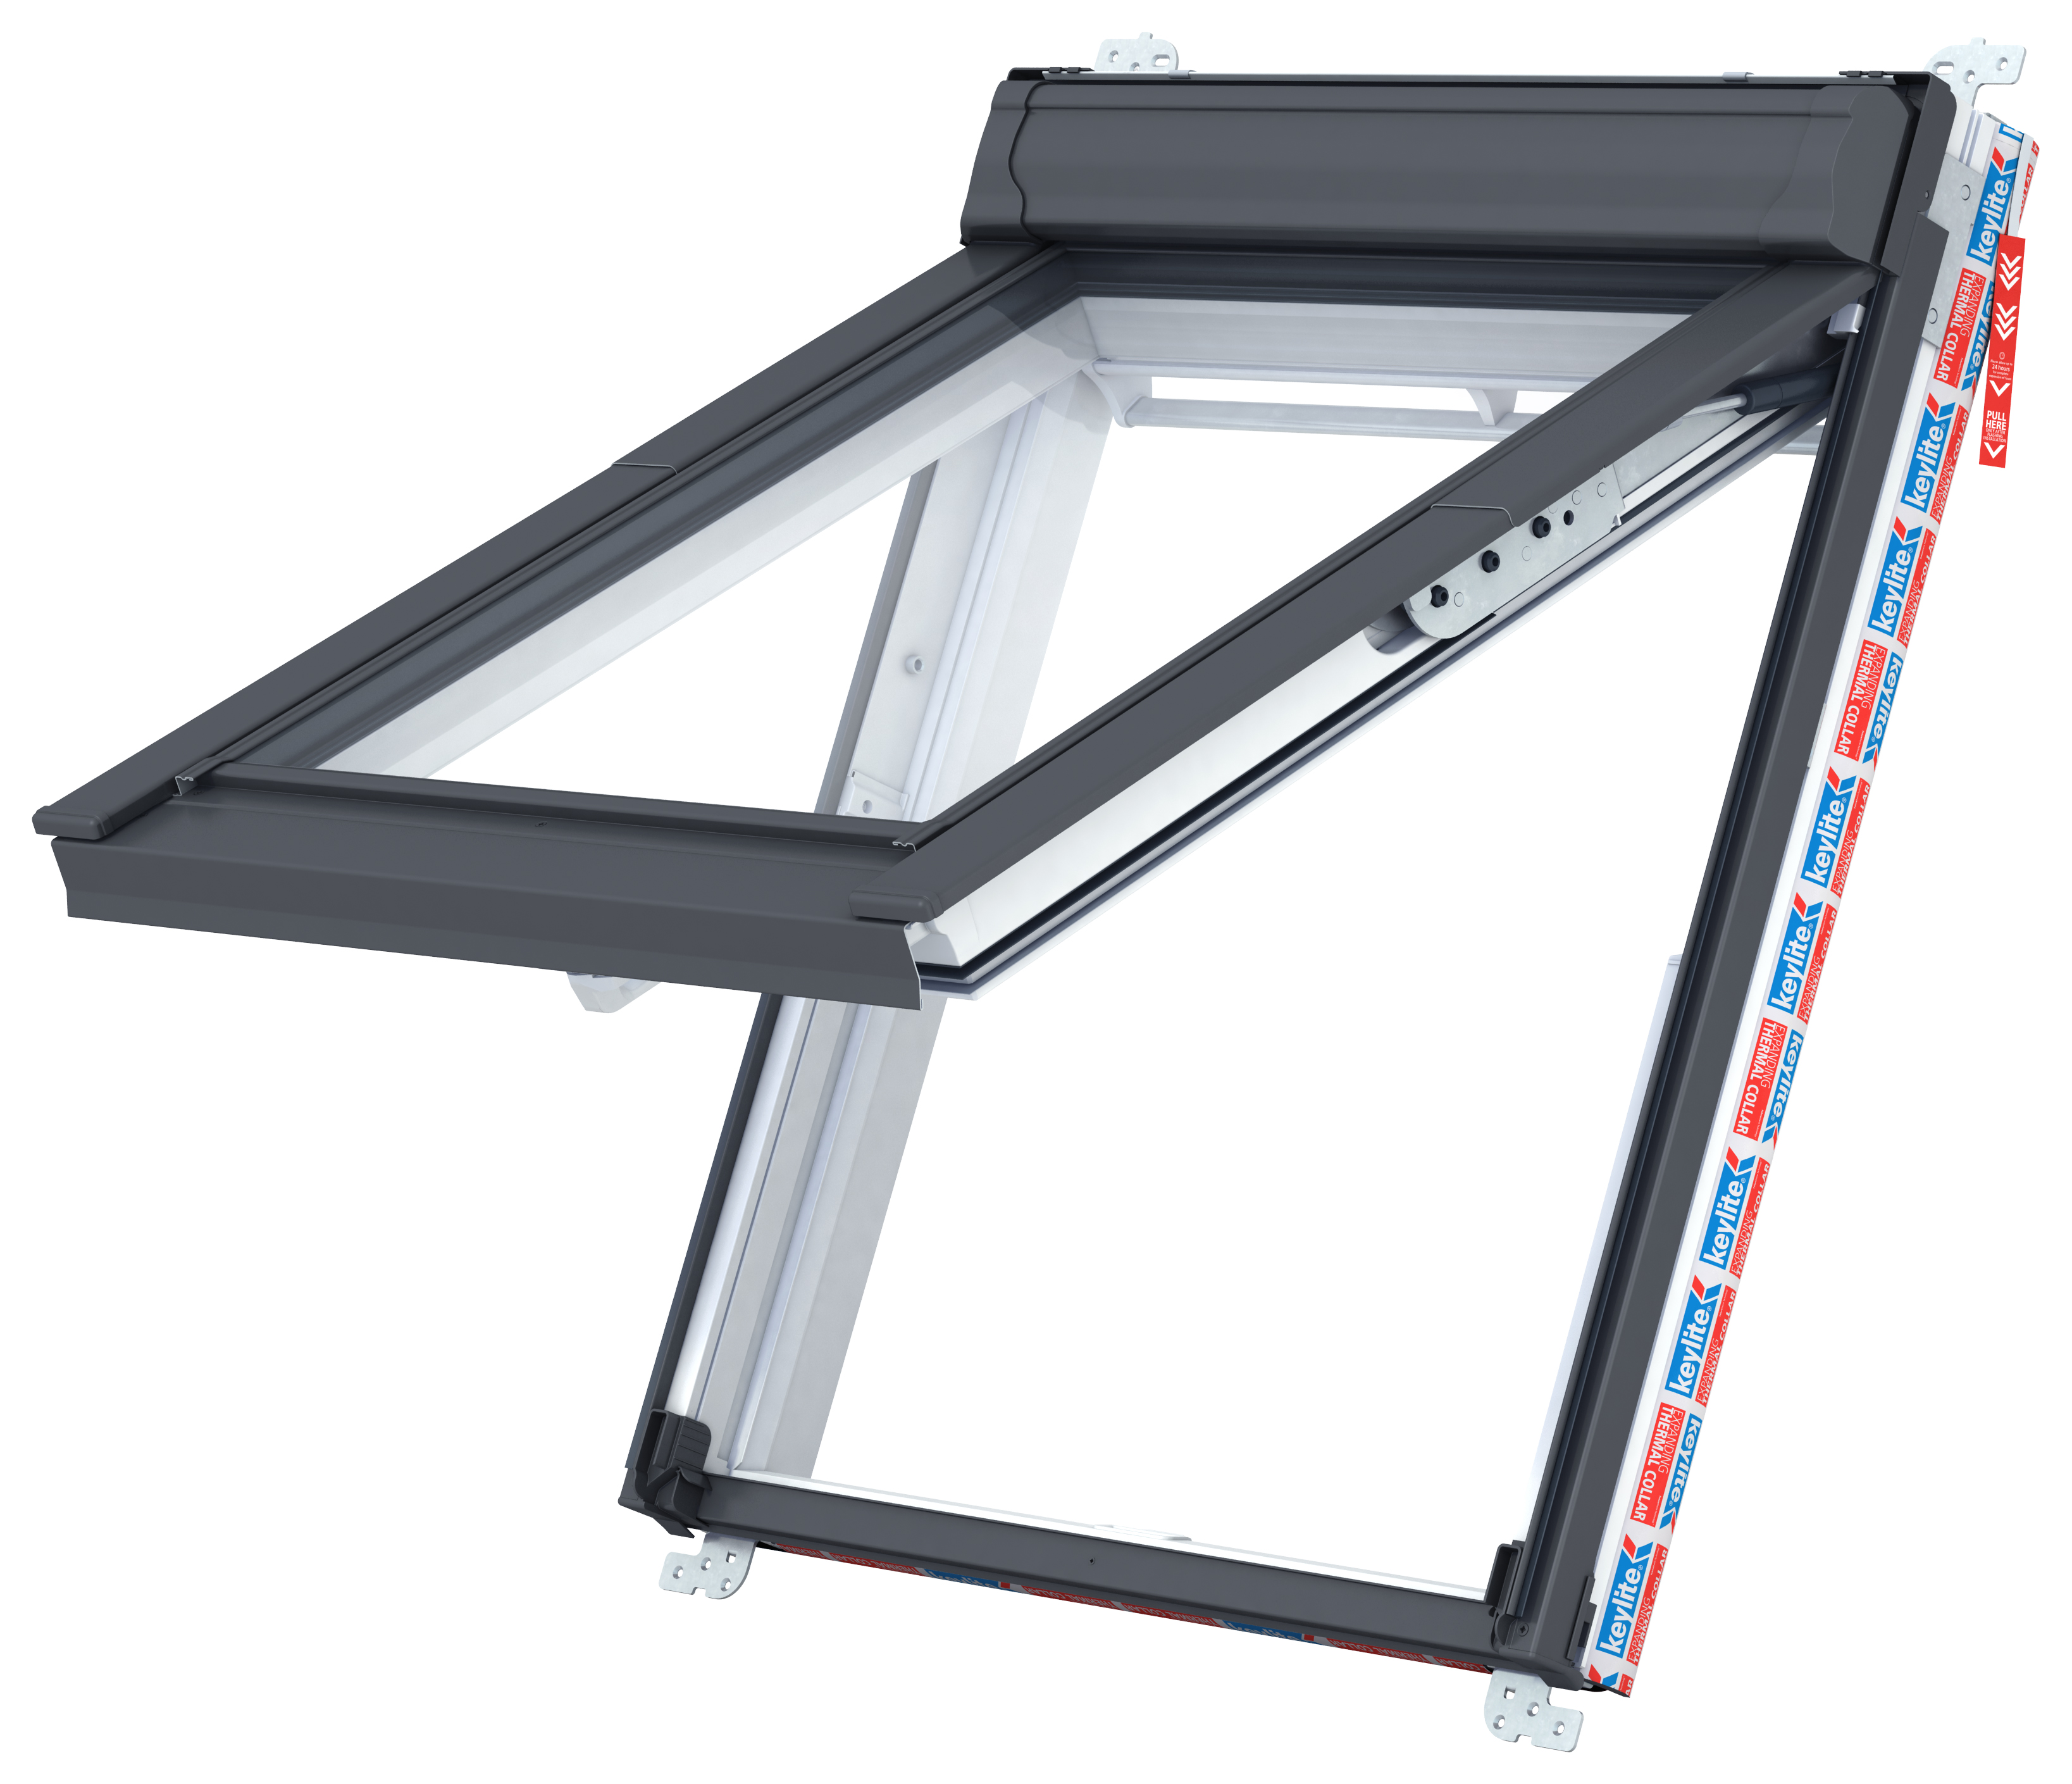 Image of Keylite WFE 04 HT White Painted Fire Escape Hi-Therm Roof Window - 780 x 980mm